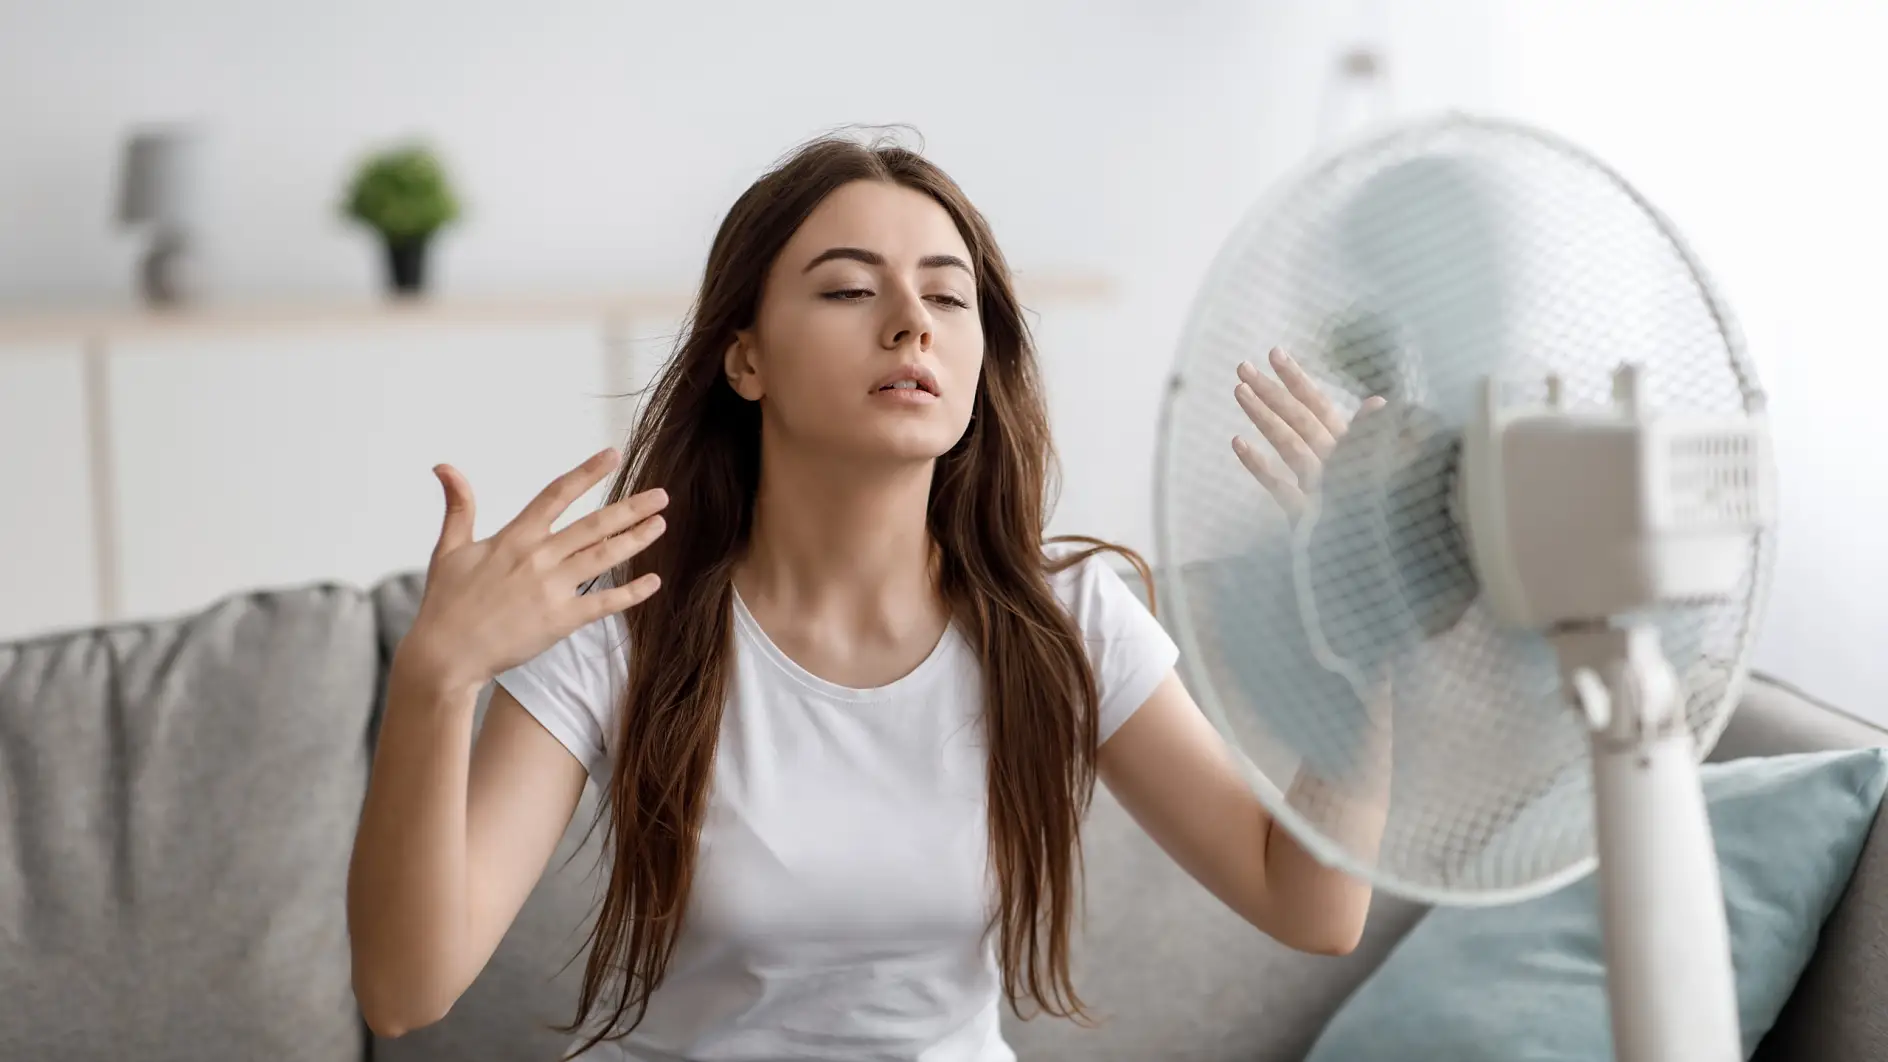 Sad young european woman suffers from unbearably too hot weather, catches cold air from fan in living room interior. Home without air conditioning, lady tired from summer heat, waves arms to cool down